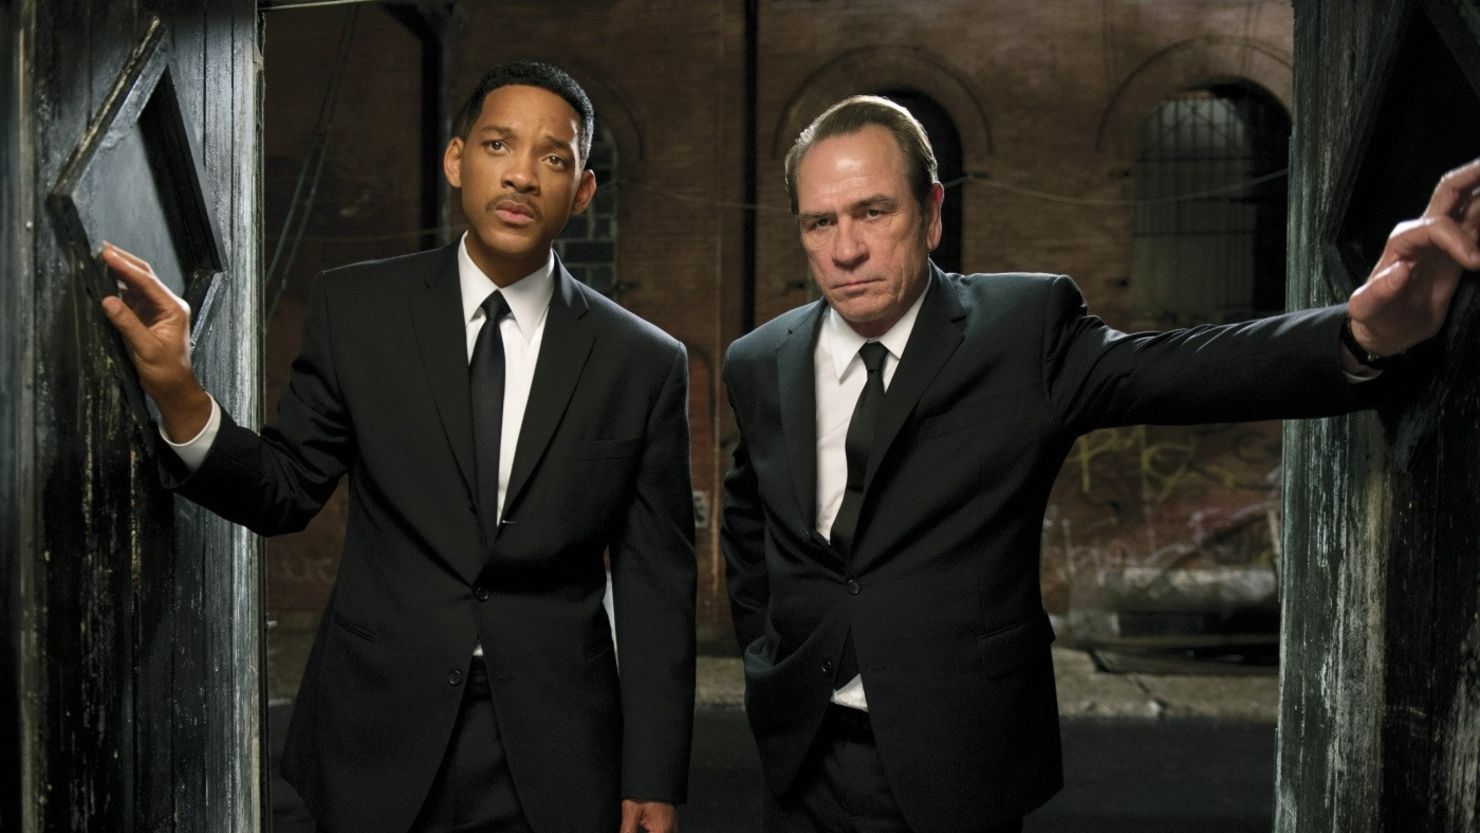 Will Smith and Tommy Lee Jones appeared in the third installment of "Men In Black."